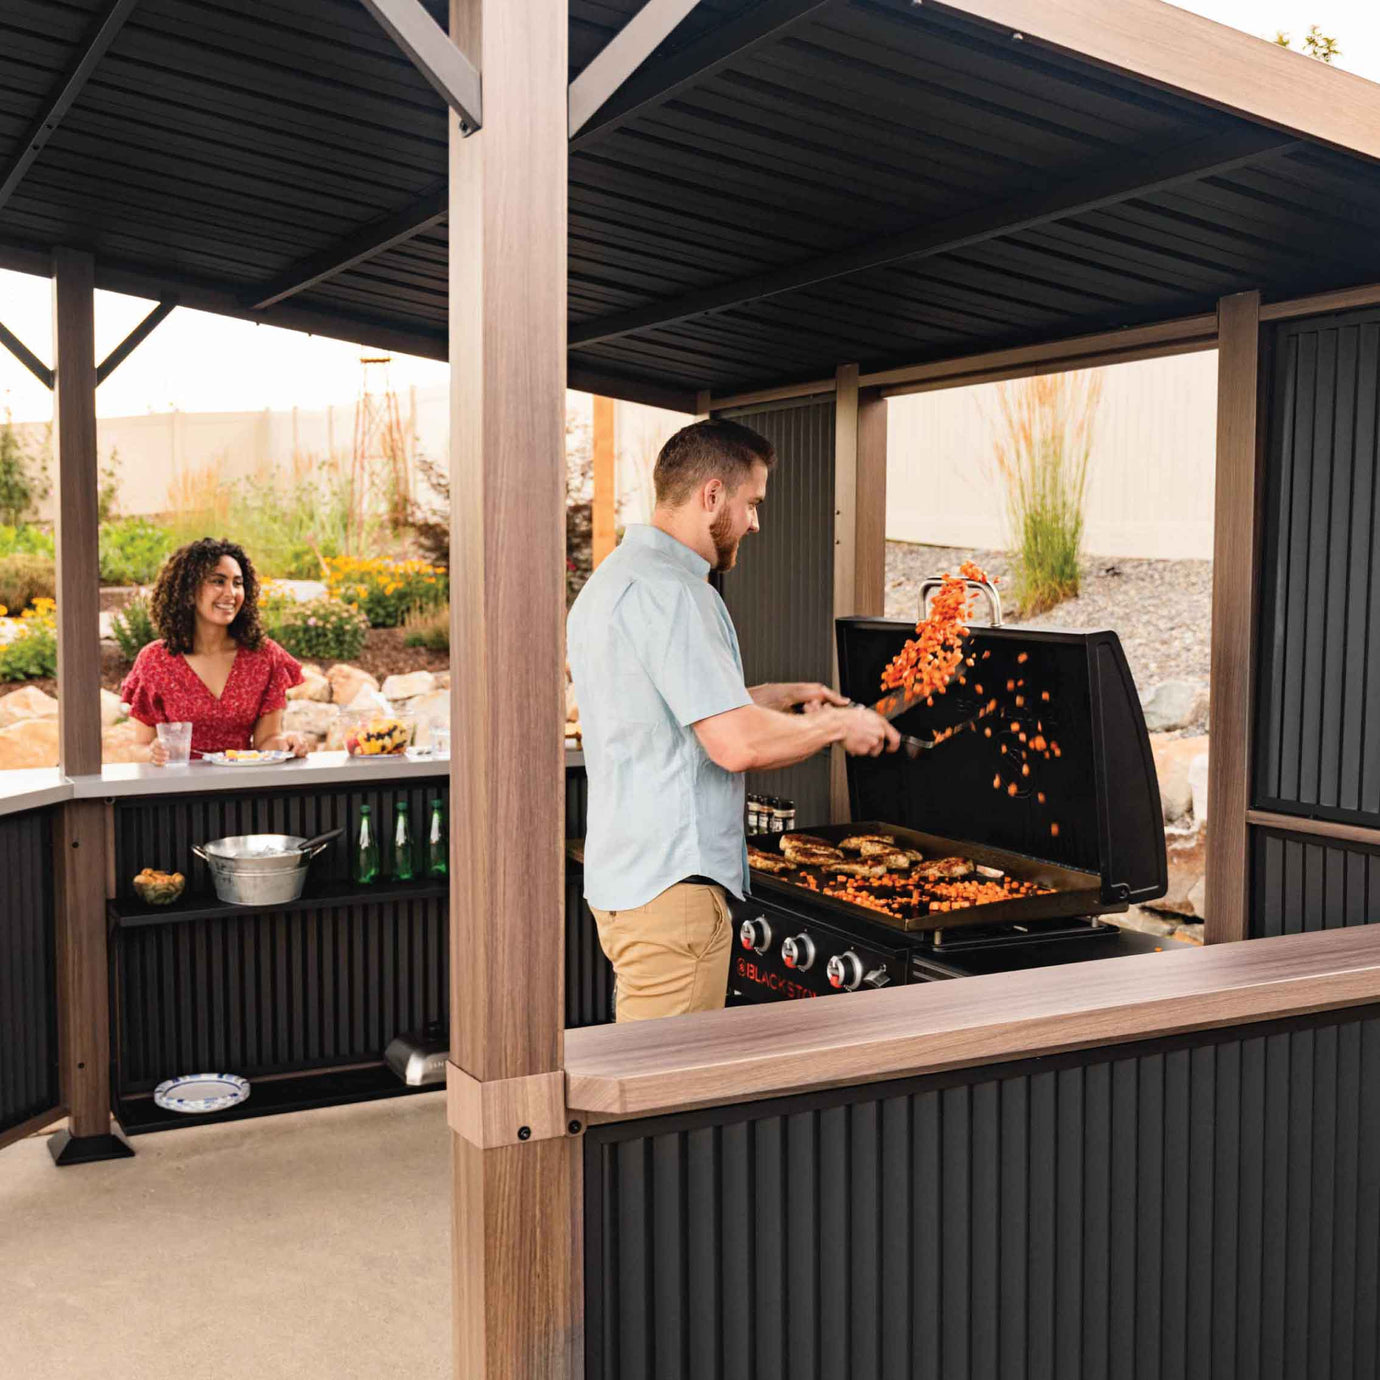 Covered Grill, Outdoor Cooking